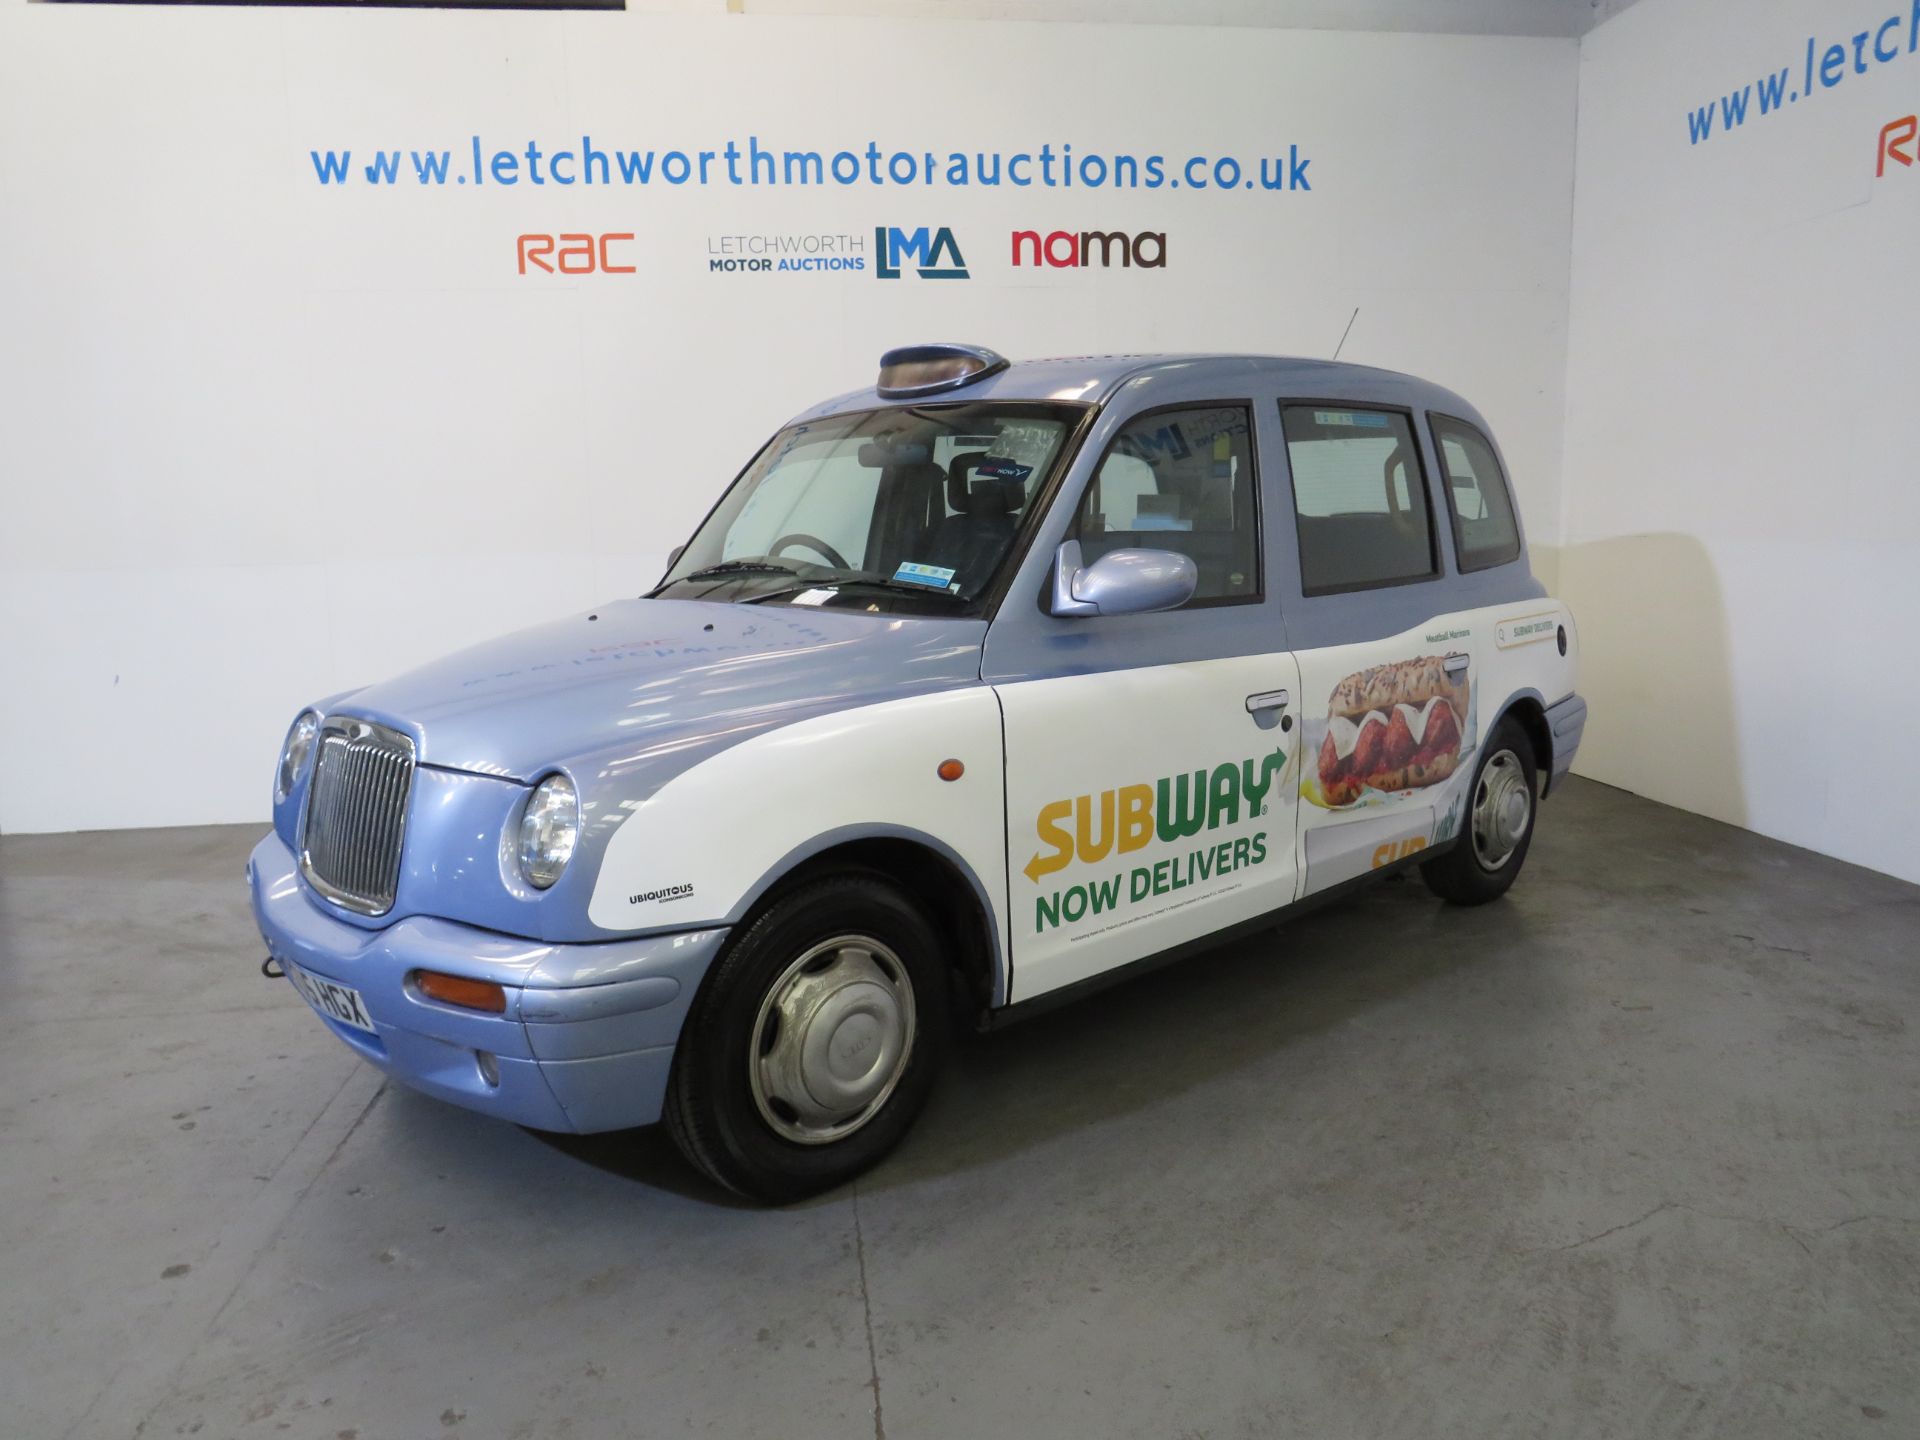 2005 London Taxis Int TXII Gold Auto - 2402cc - Image 3 of 10